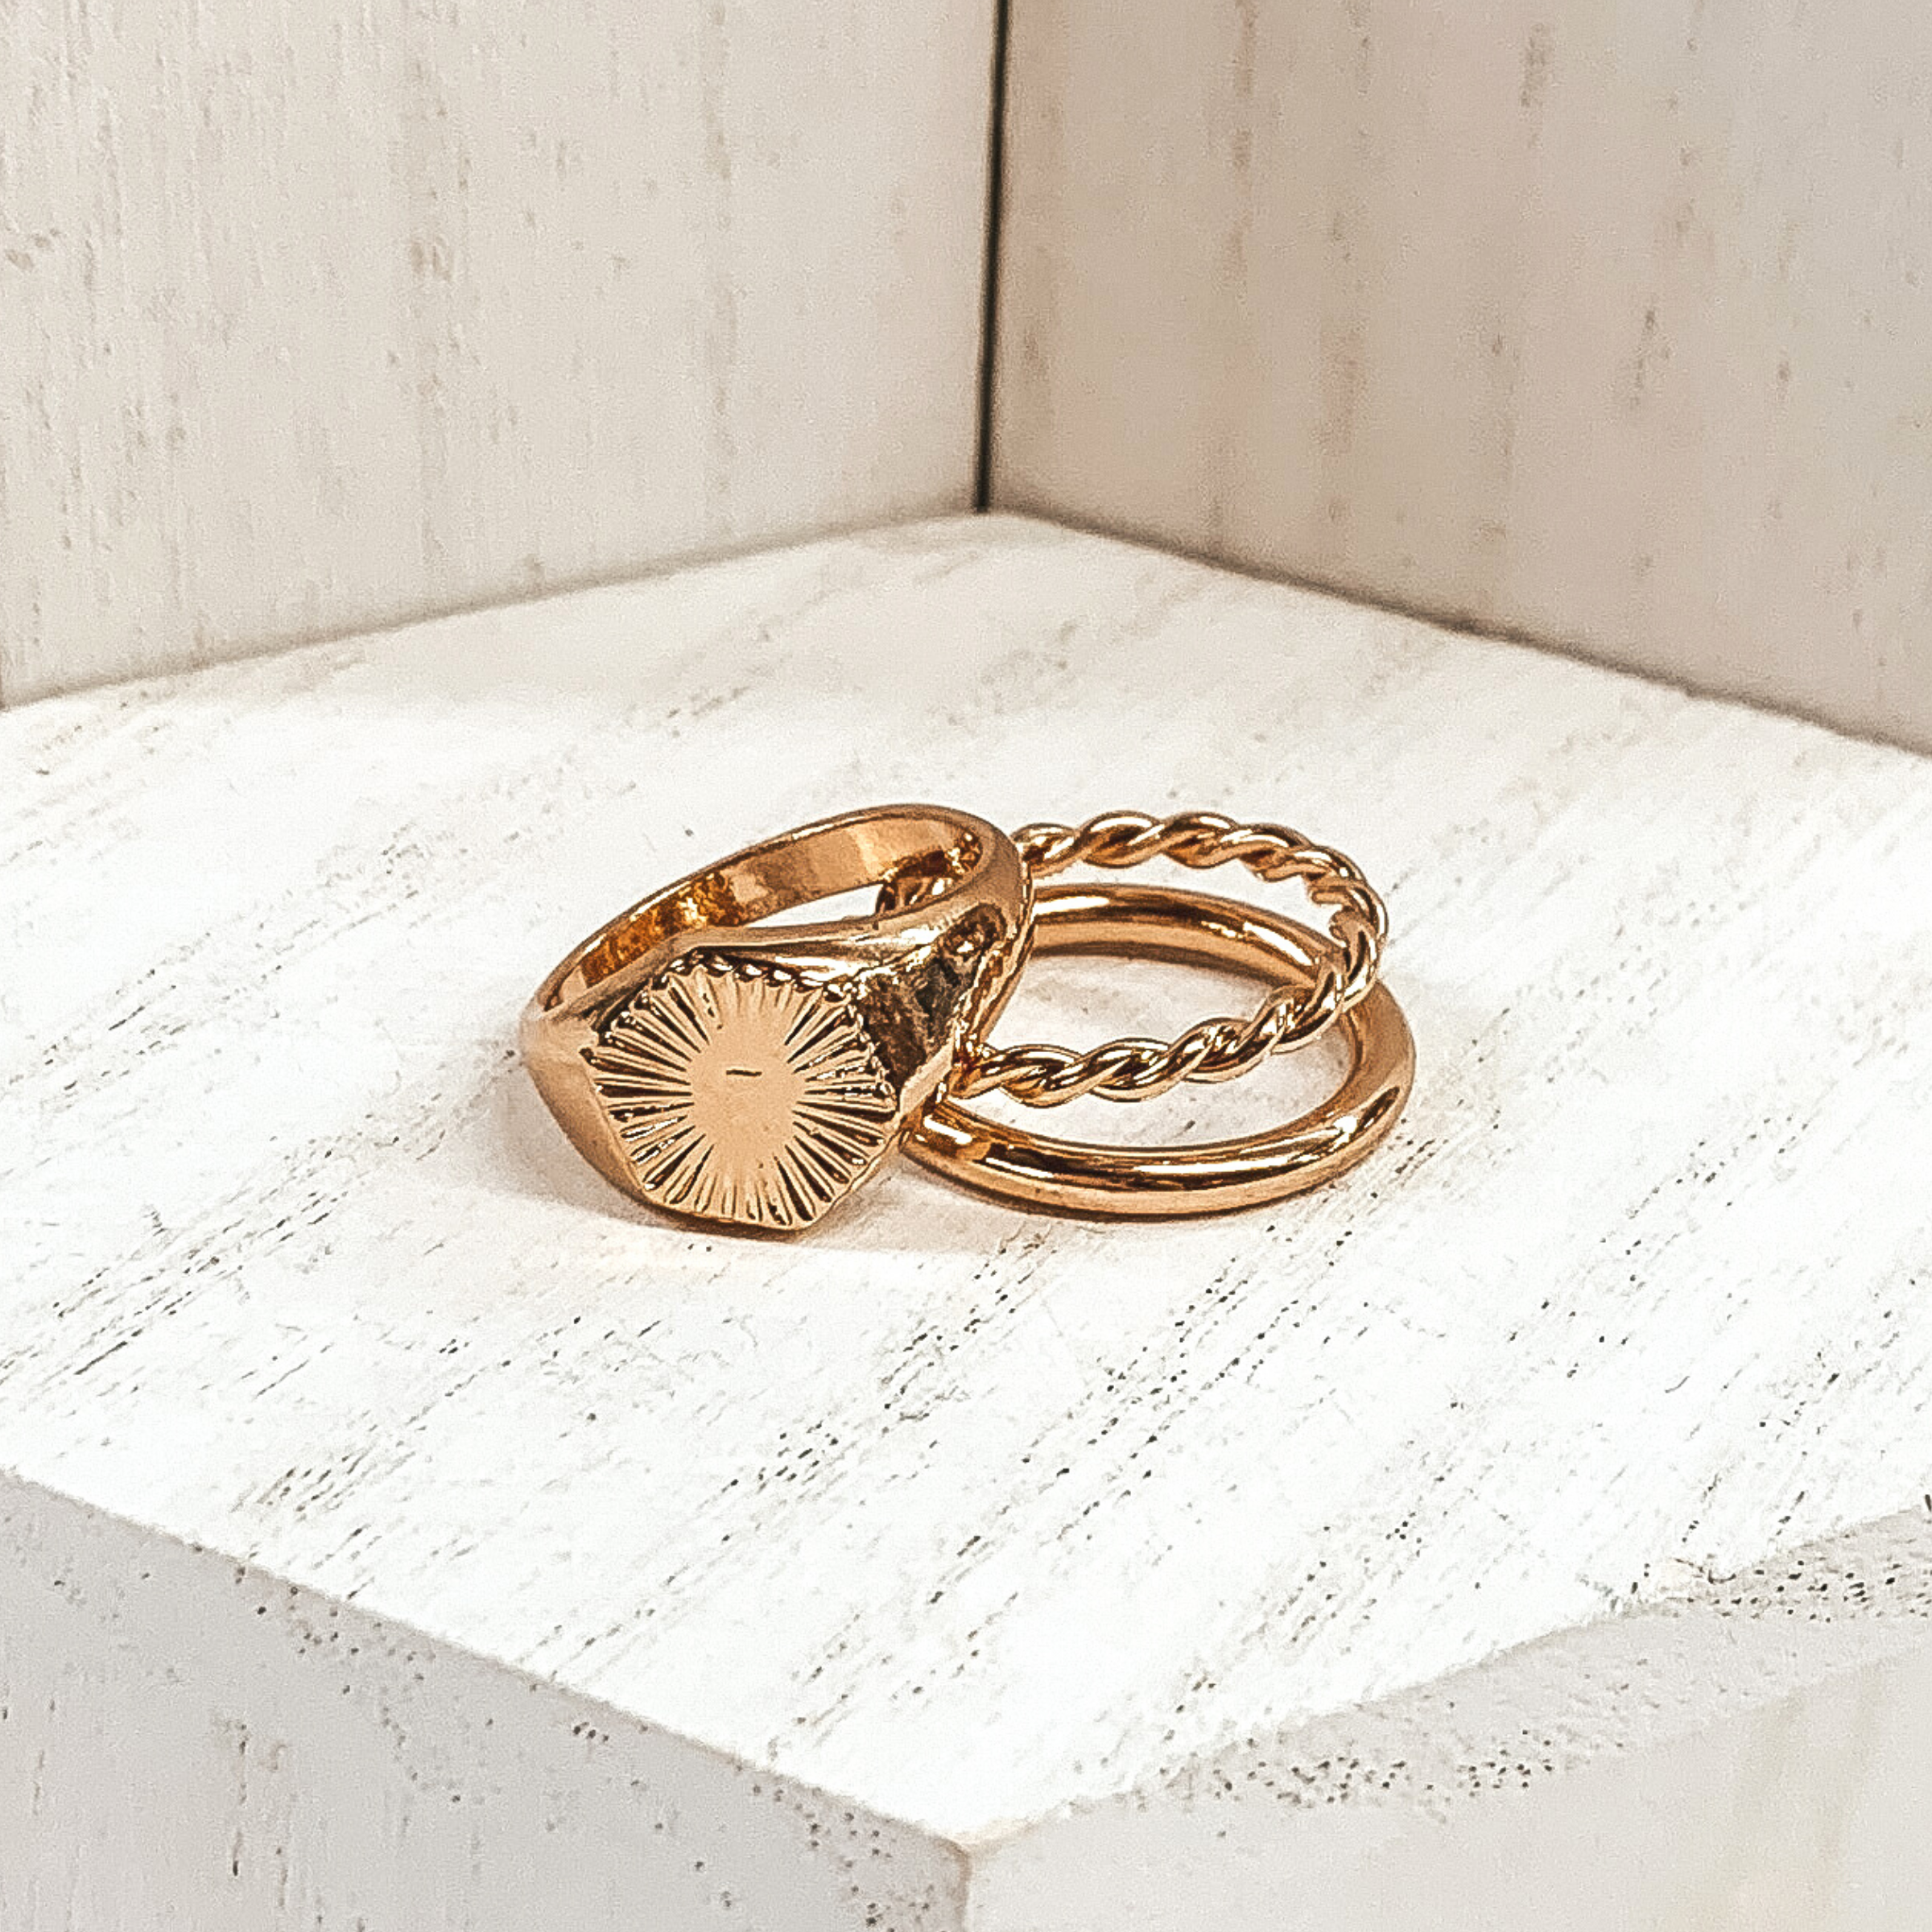 Both rings are gold in color. The double ring has one plain band and one twisted band. The ring that is leaning on it has a hexagon pendant with a starburst design on it. These rings are pictured on a white background.